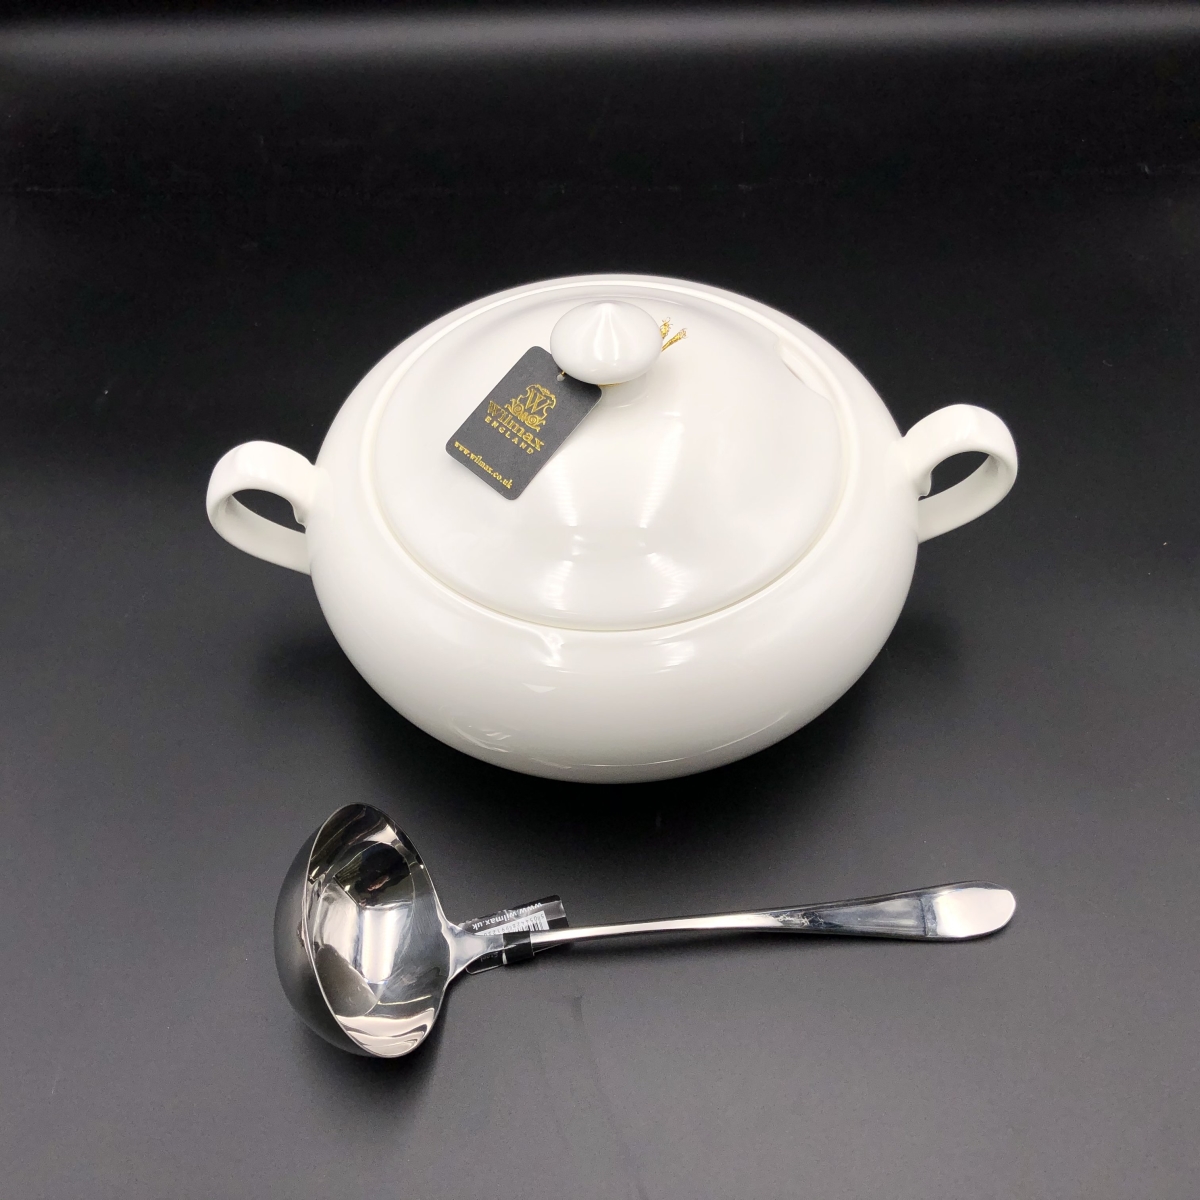 Family Size Tureen with a Ladle for Soups & Stews - White -  FoodFirst, FO3279318